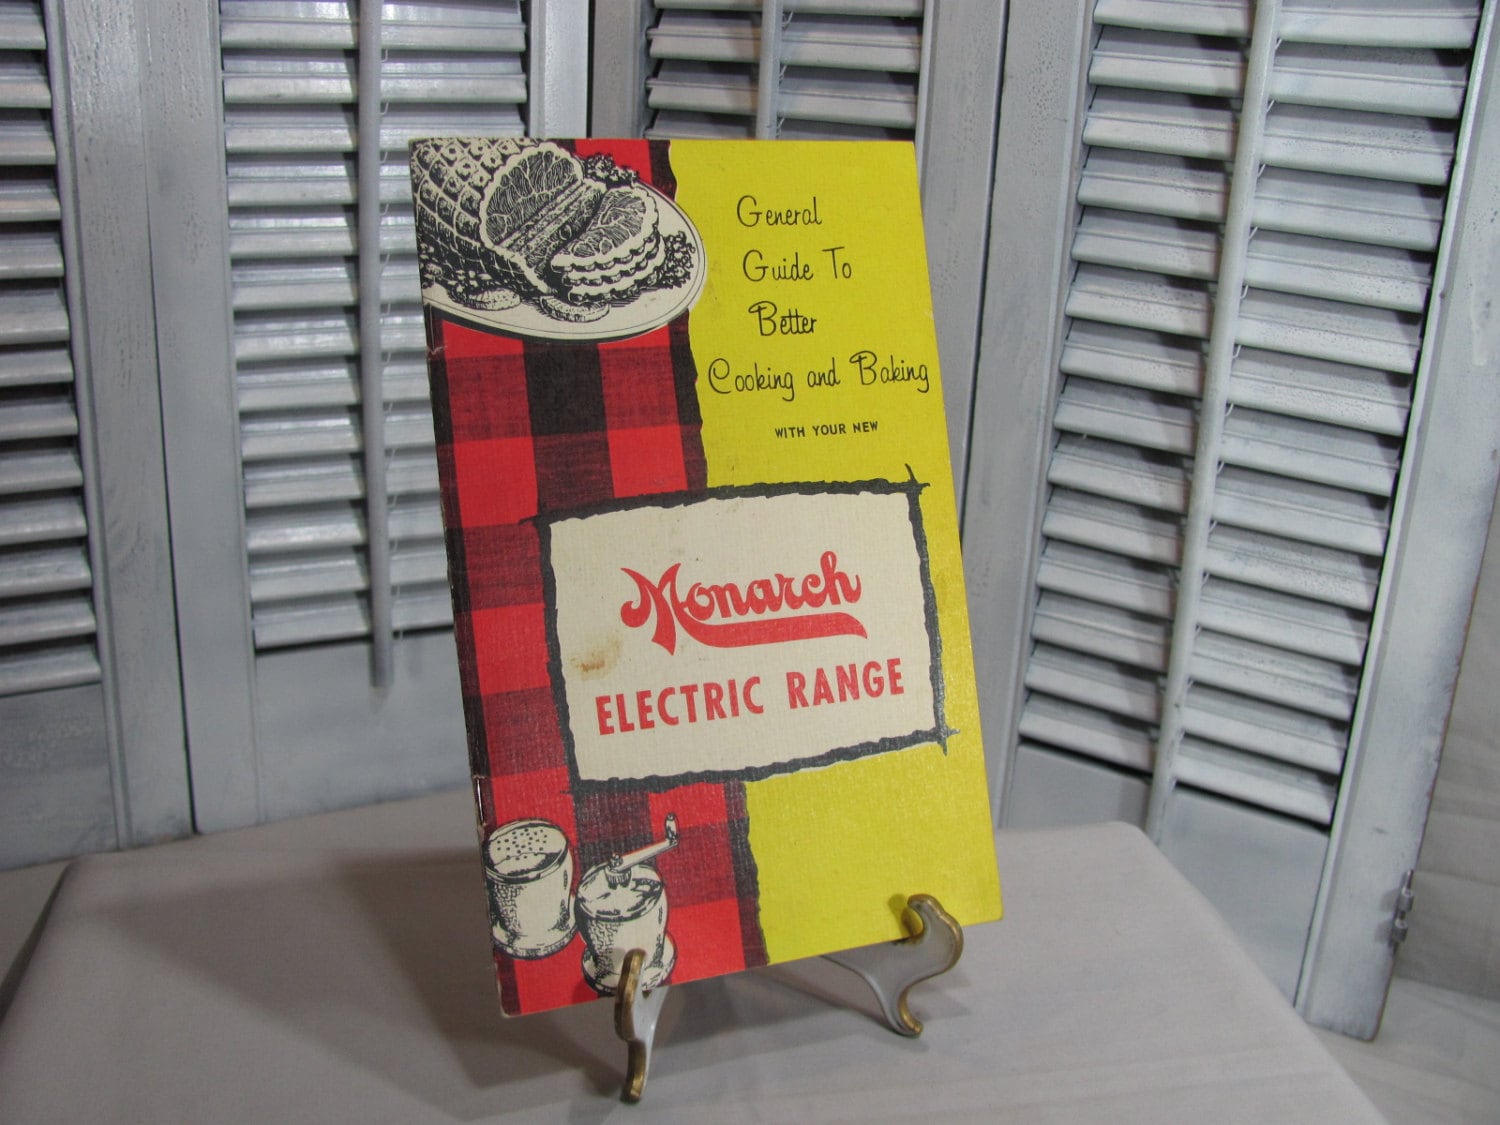 Monarch Electric Range General Guide to by NorCalTreasuresByKA